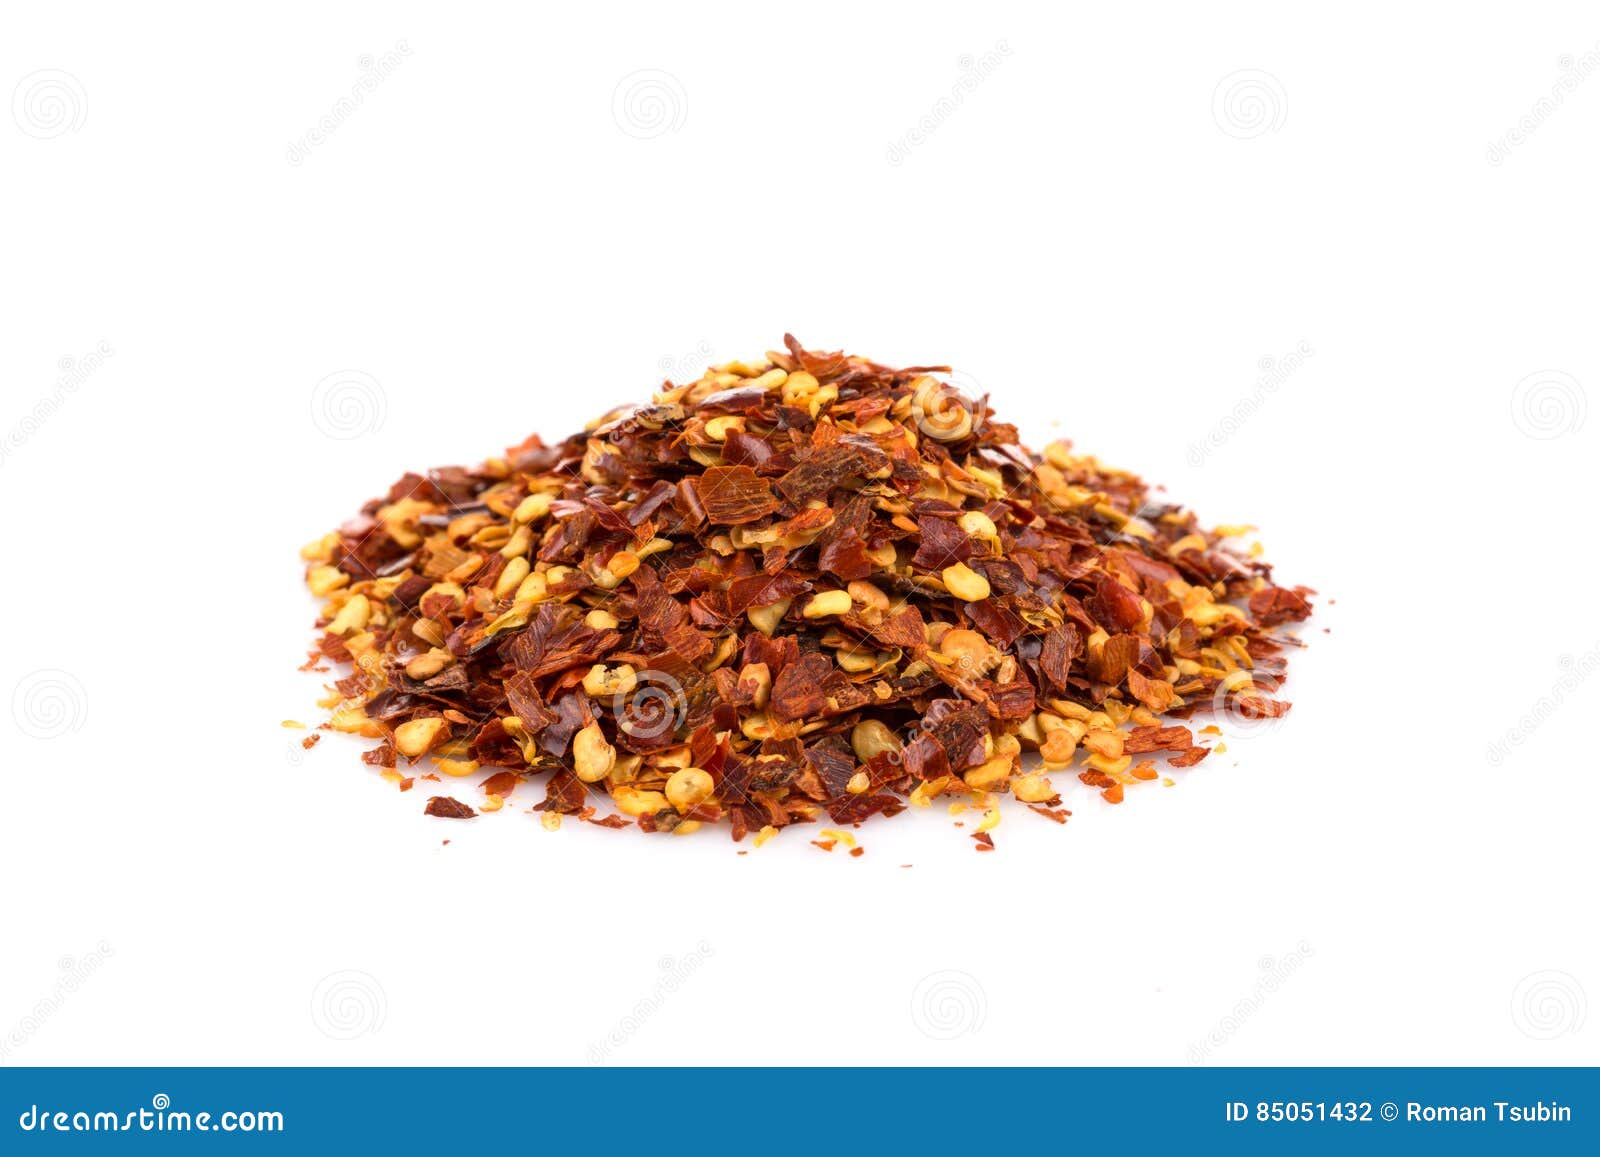 pile of a crushed red pepper